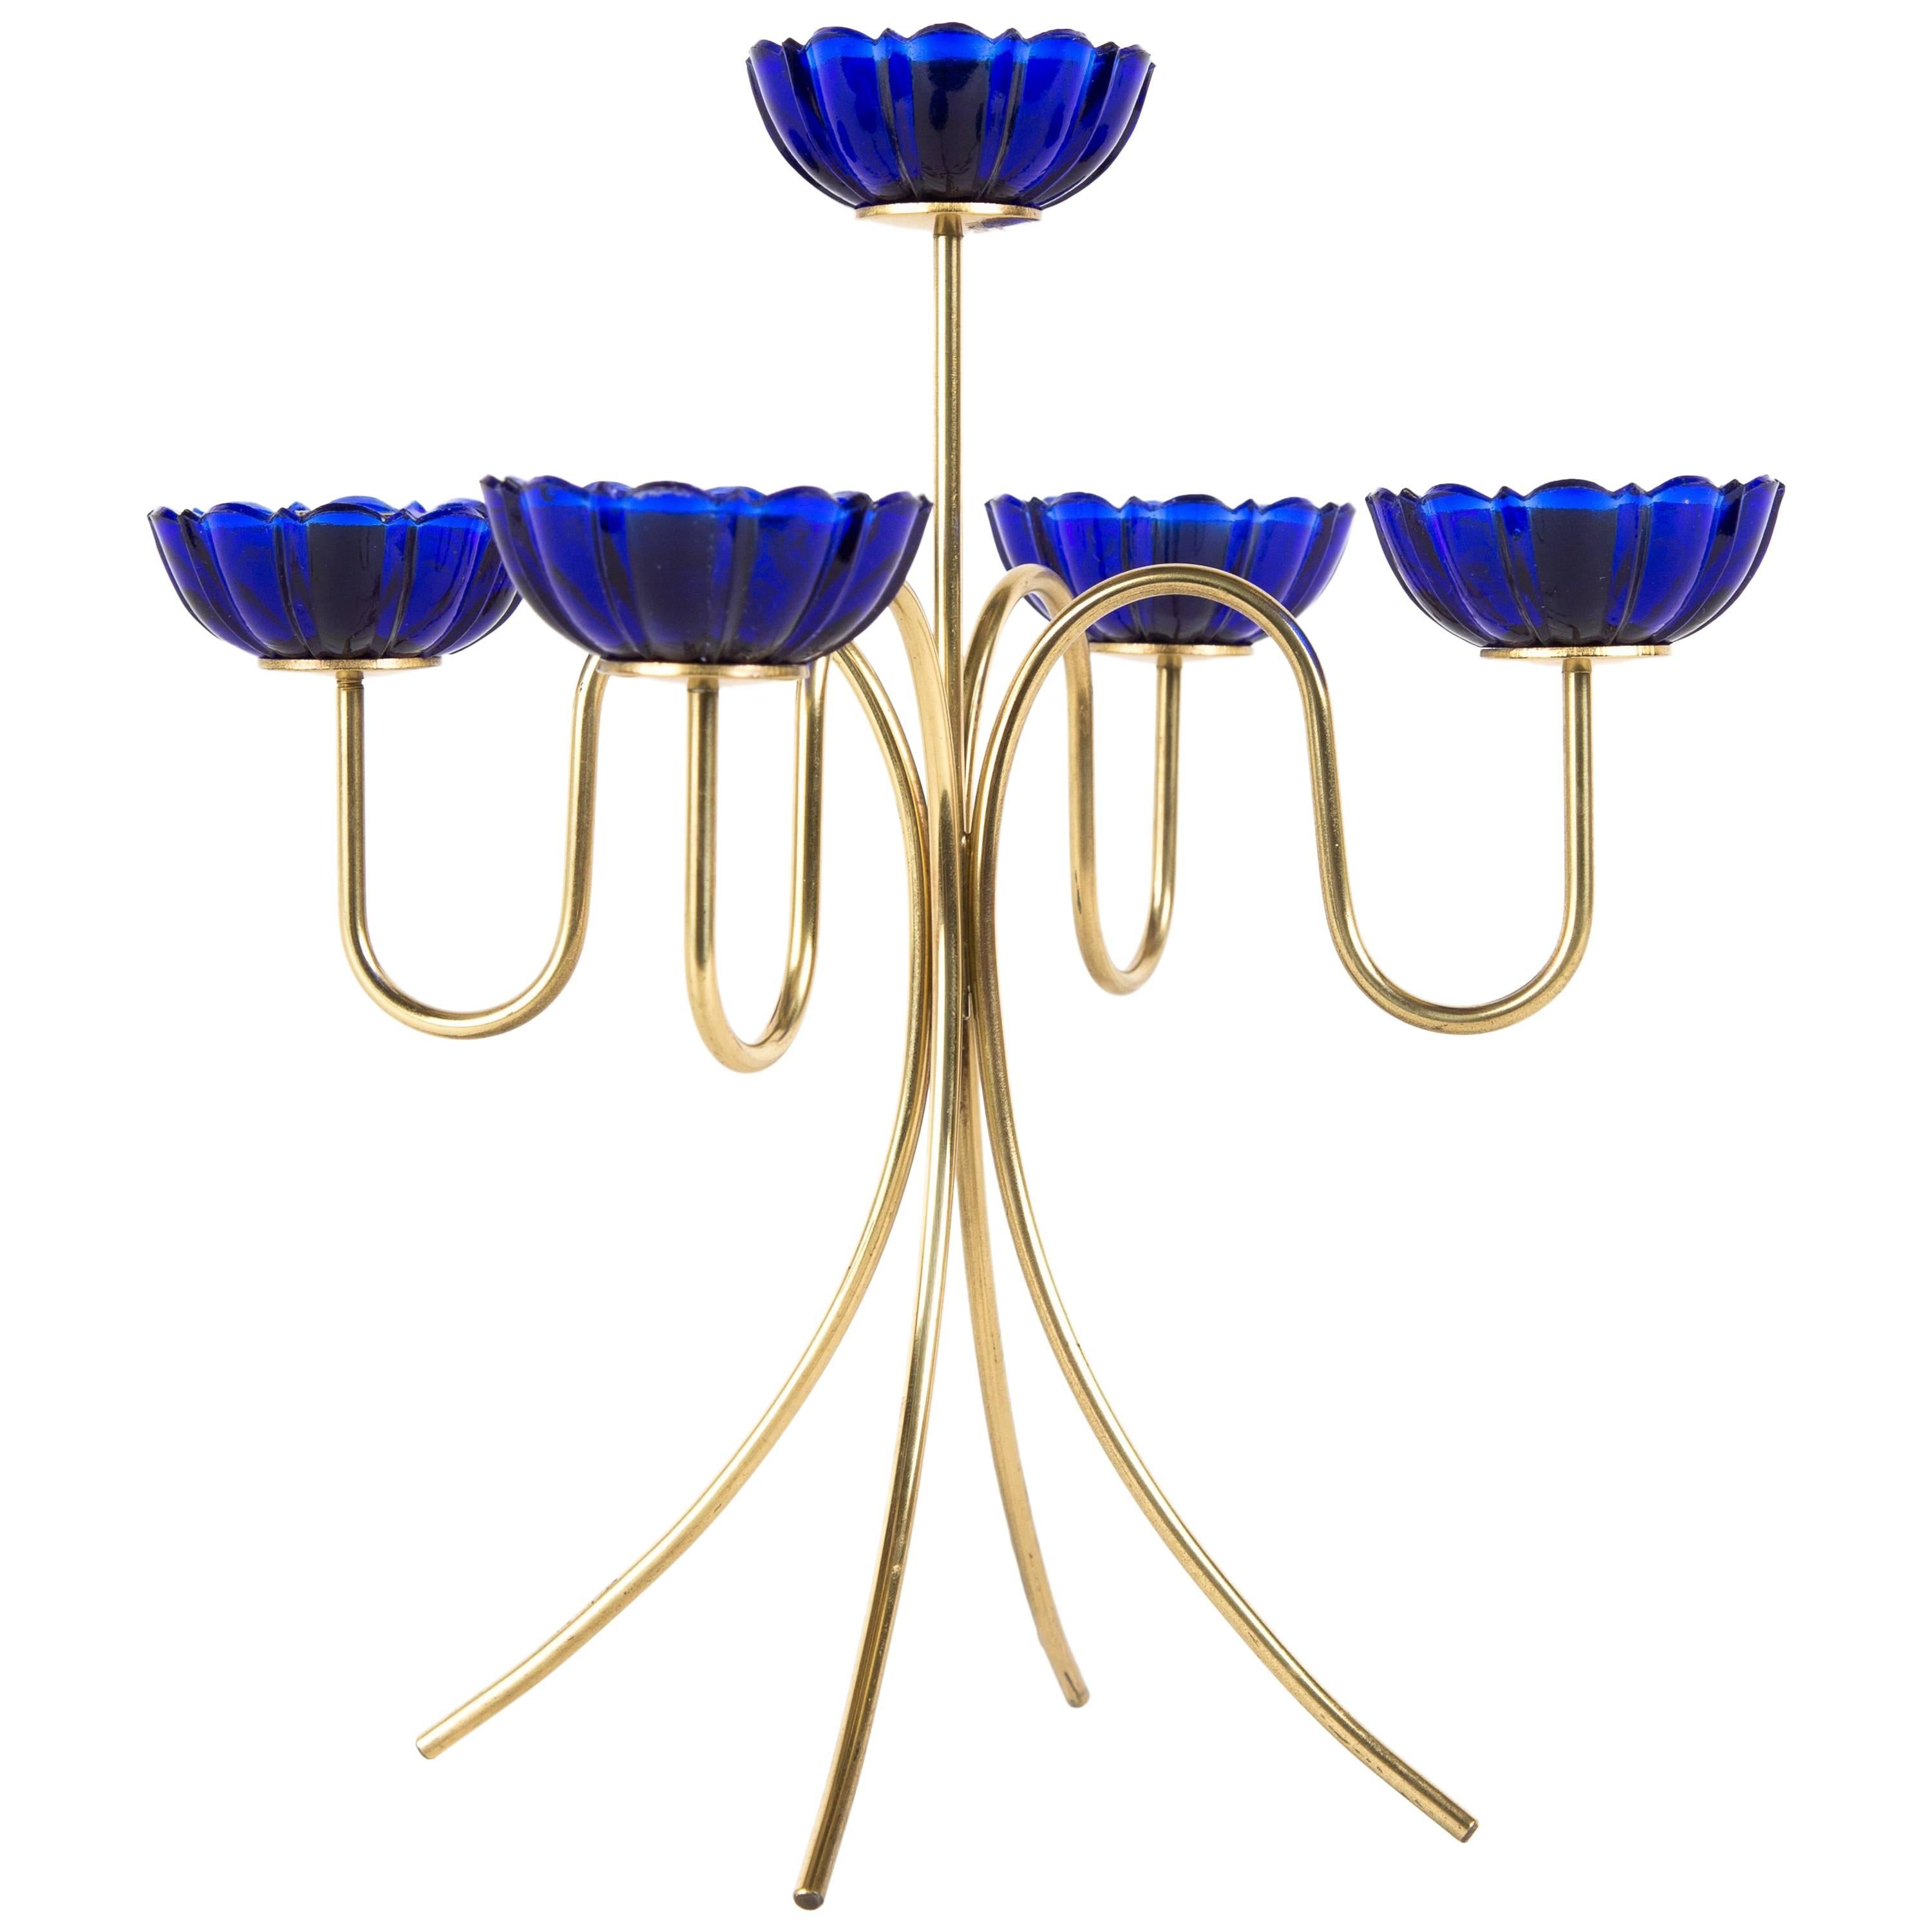 GUNNAR ANDER CANDLE HOLDER for Ystad Metall with brass and artglas in blue For Sale